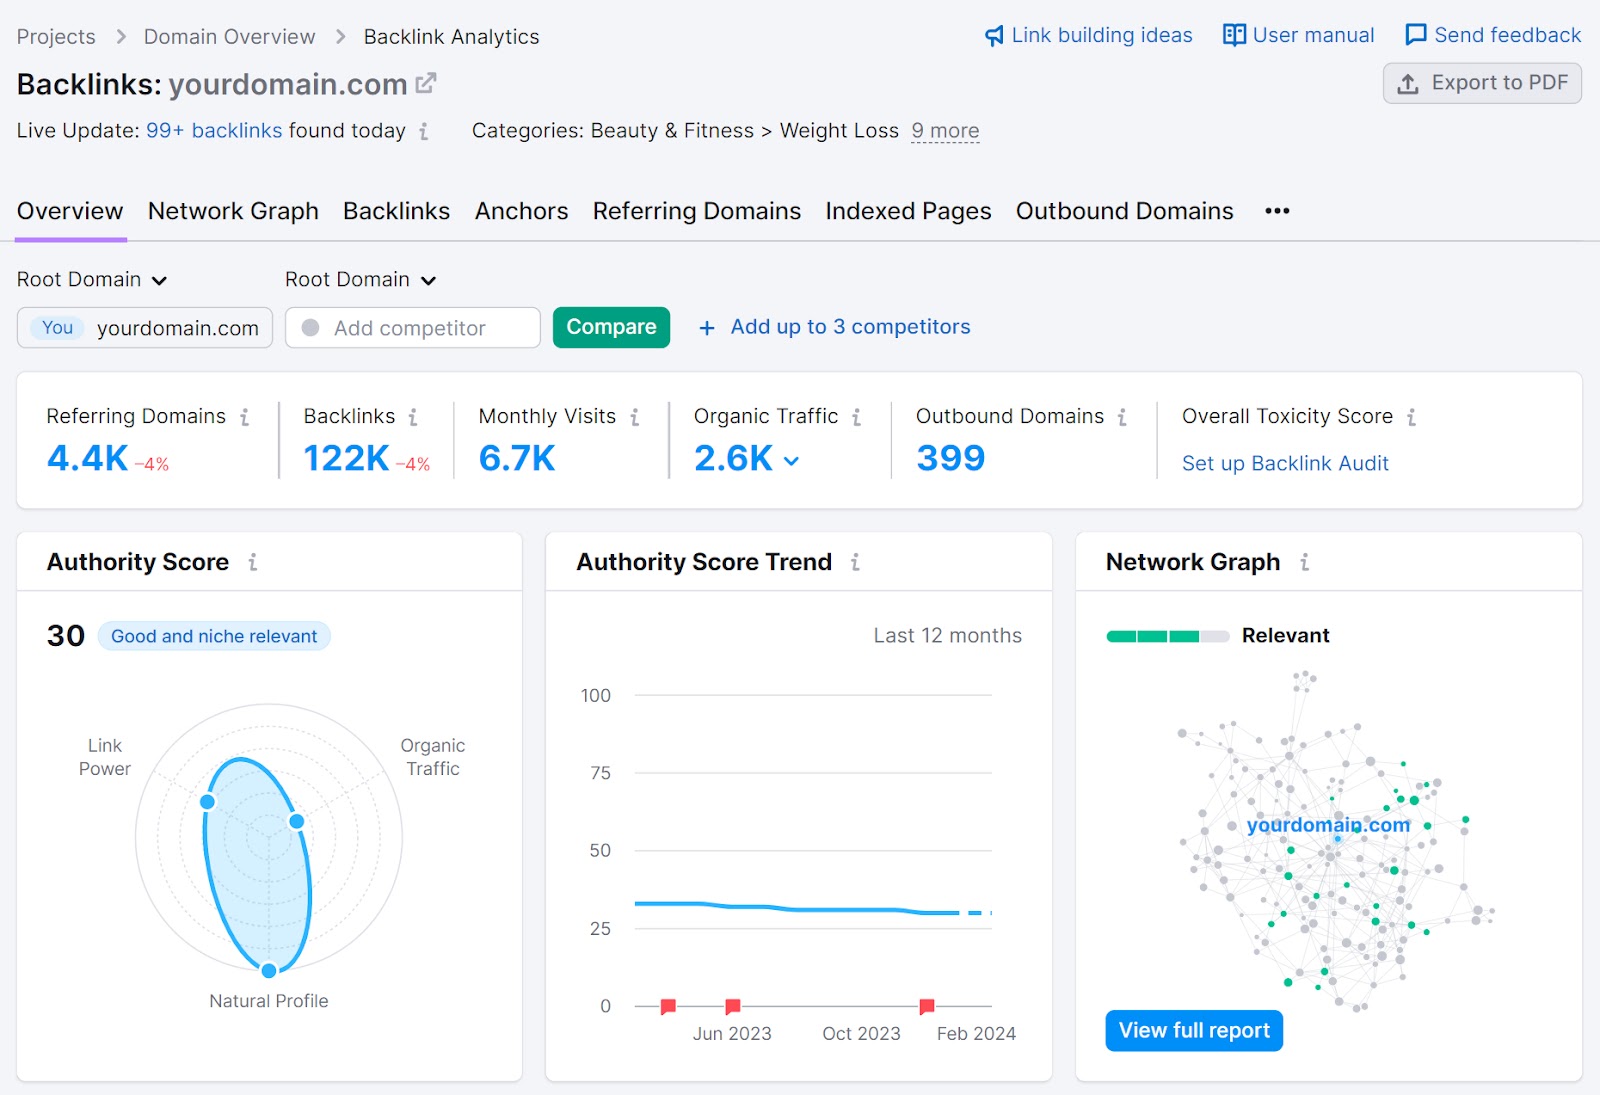 A section of overview dashboard in Backlink Analytics tool